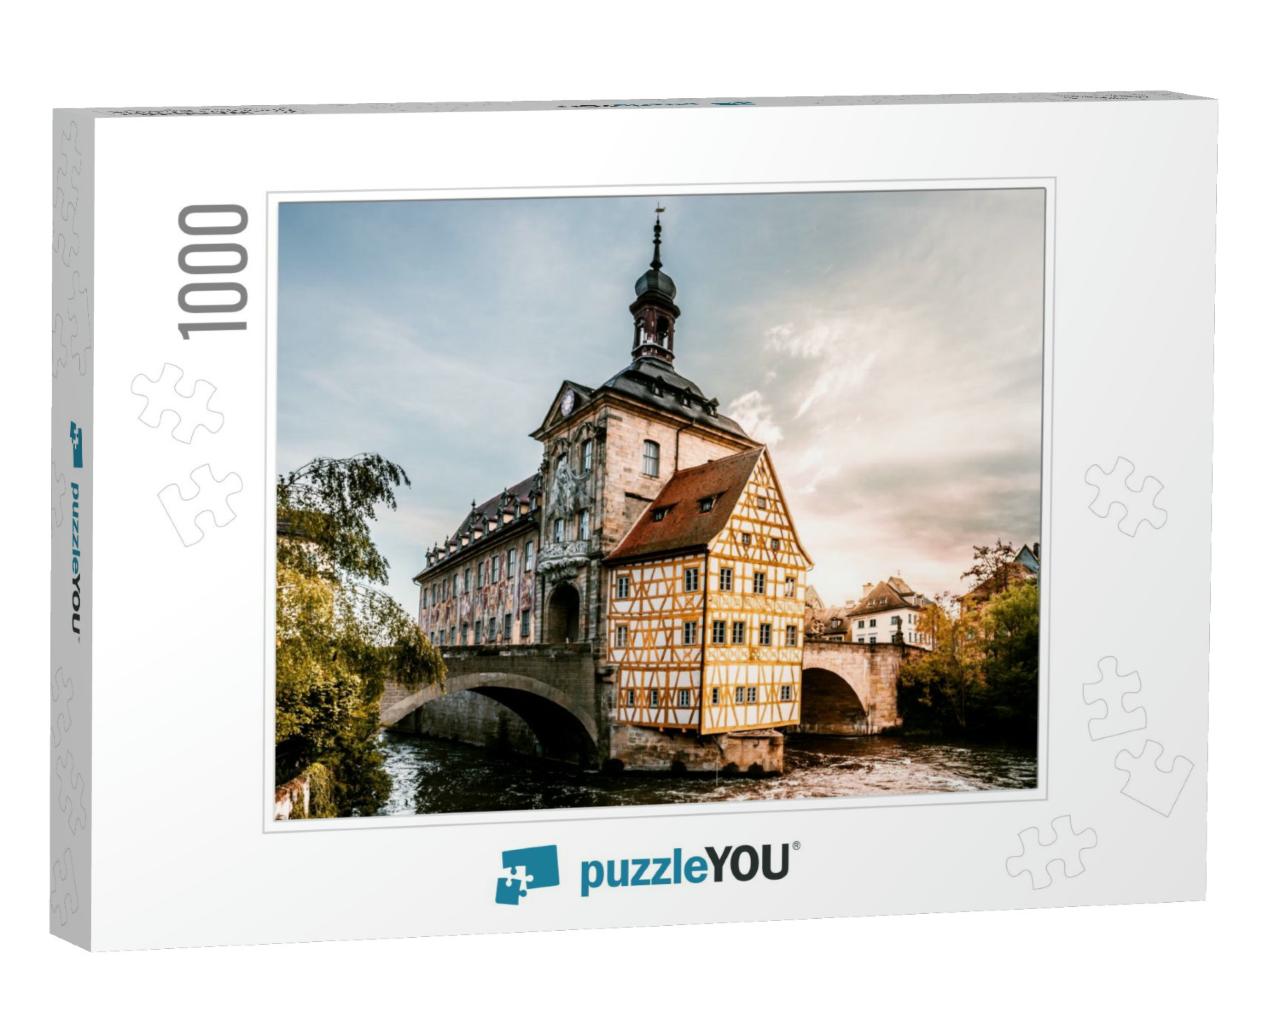 The Radhhaus in Bamberg in the Middle of the River in the... Jigsaw Puzzle with 1000 pieces